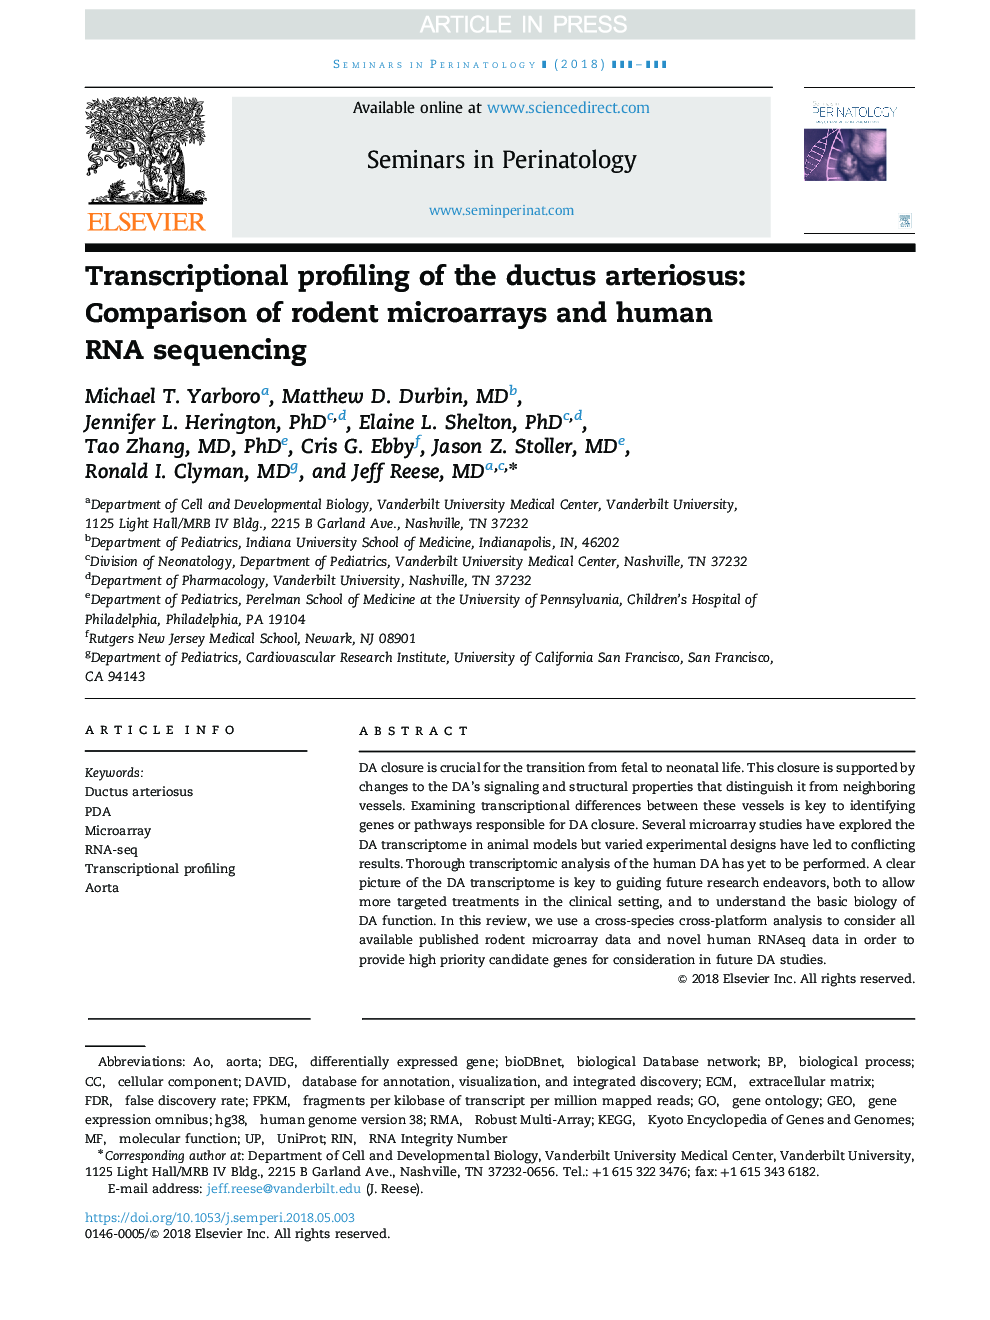 Transcriptional profiling of the ductus arteriosus: Comparison of rodent microarrays and human RNA sequencing